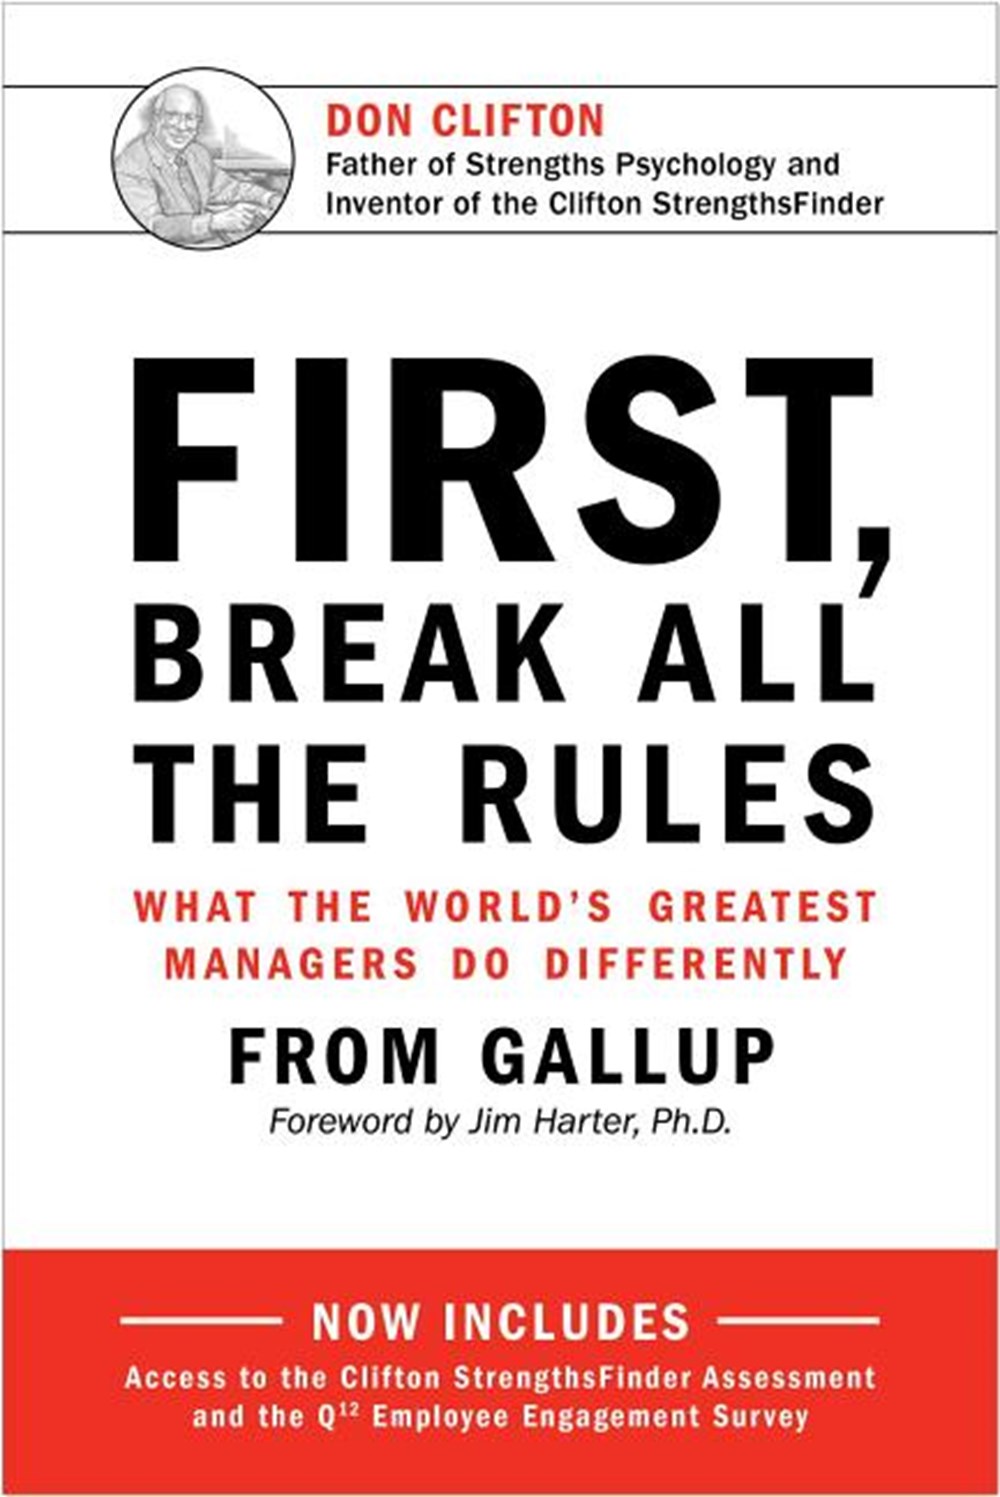 First, Break All the Rules What the World's Greatest Managers Do Differently